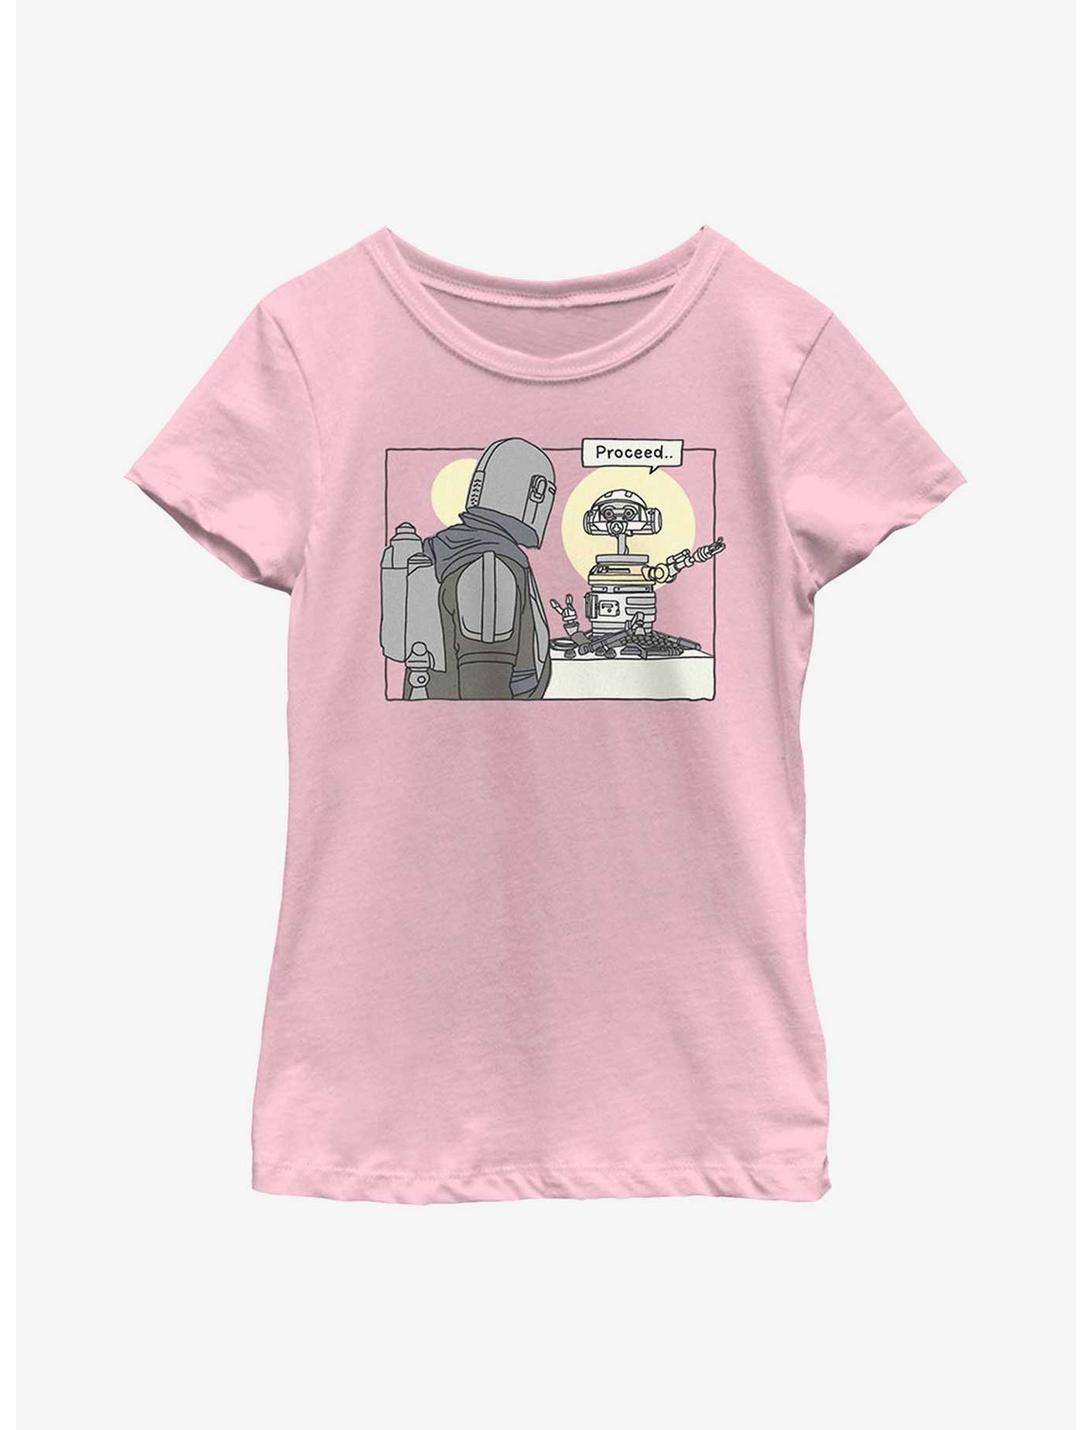 Star Wars The Book Of Boba Fett Proceed Youth Girls T-Shirt, PINK, hi-res